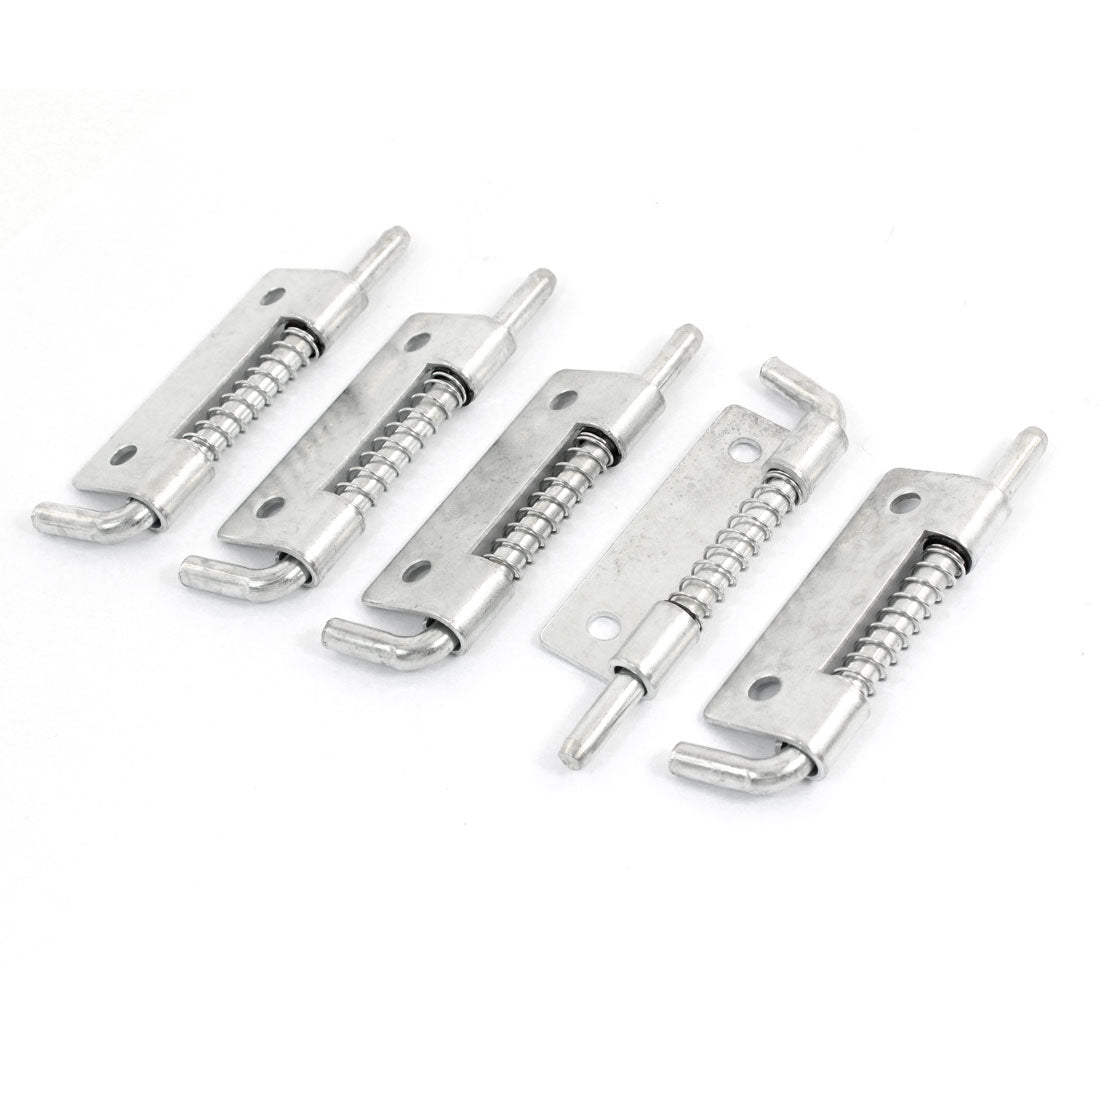 uxcell Uxcell 5 Pcs Locked Spring Loaded Metal Barrel Bolt Latch Silver Tone 9cm Length